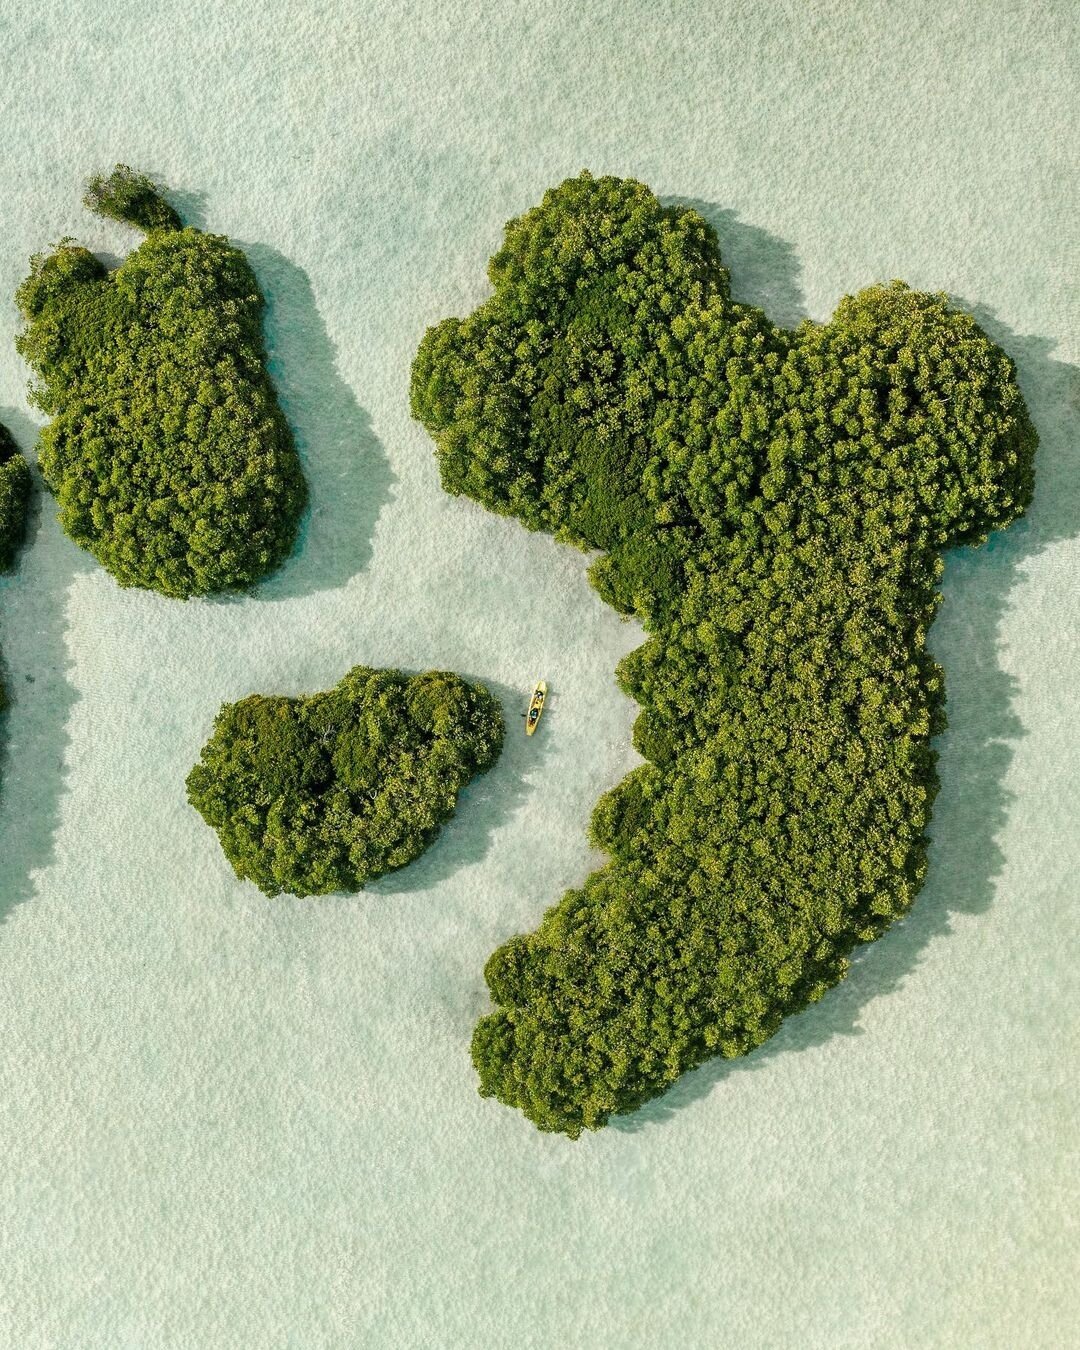 Mangroves of Maldives | by @seefromthesky⁠
&ndash; #staffpick #droneheroes